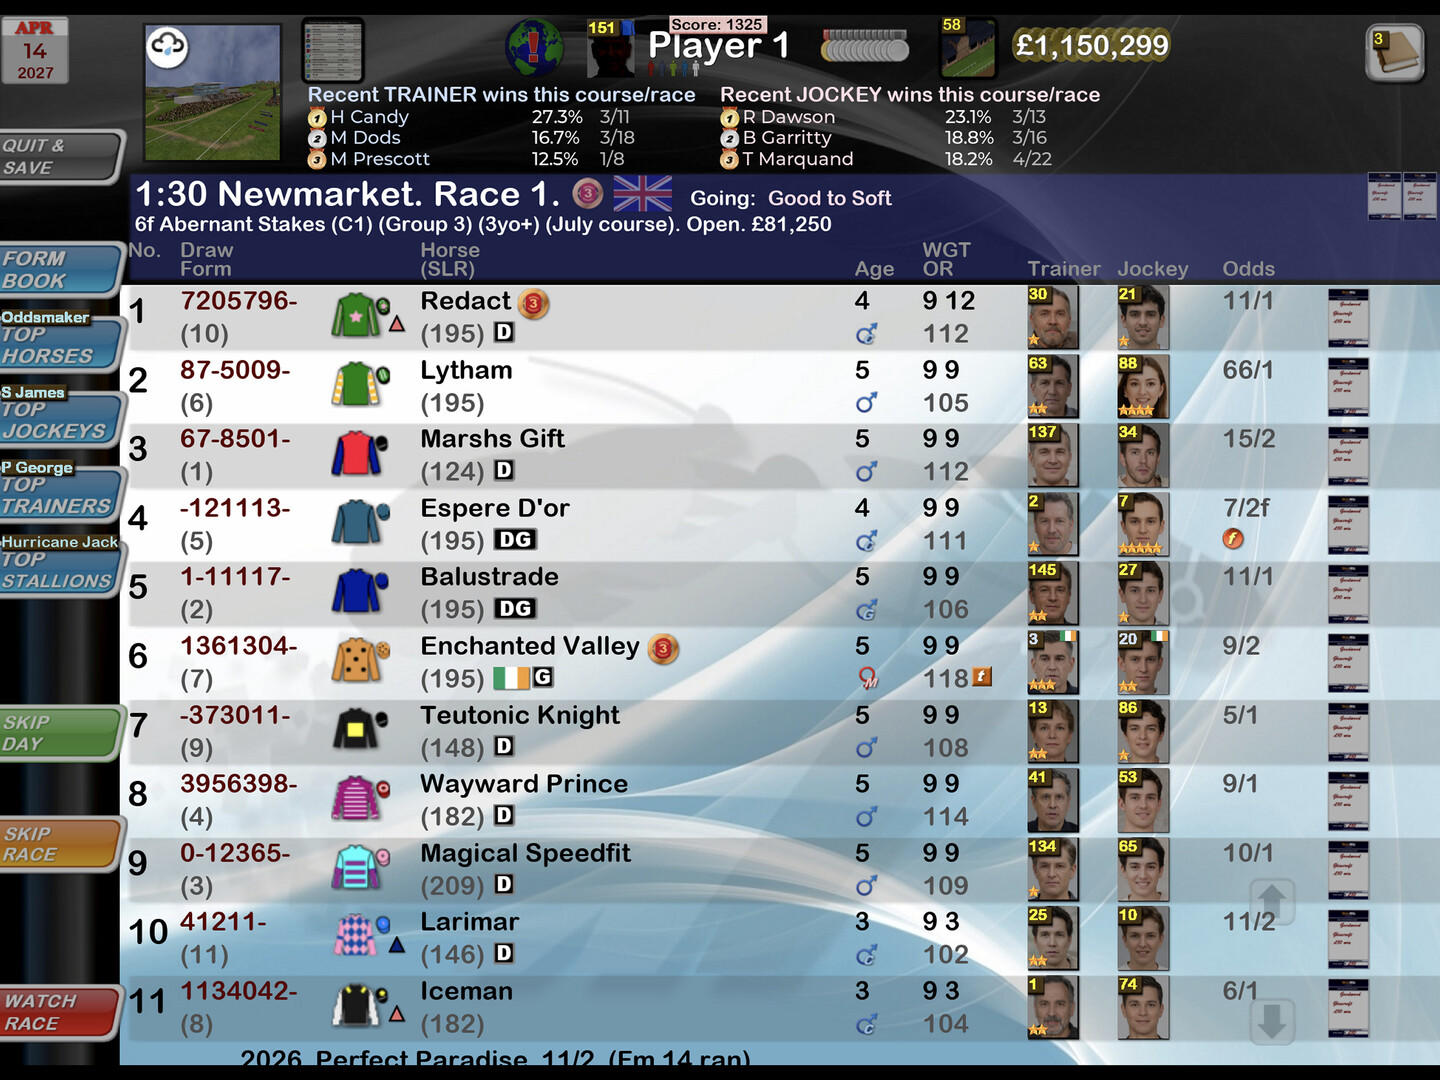 Screenshot of Starters Orders Touch Horse Racing